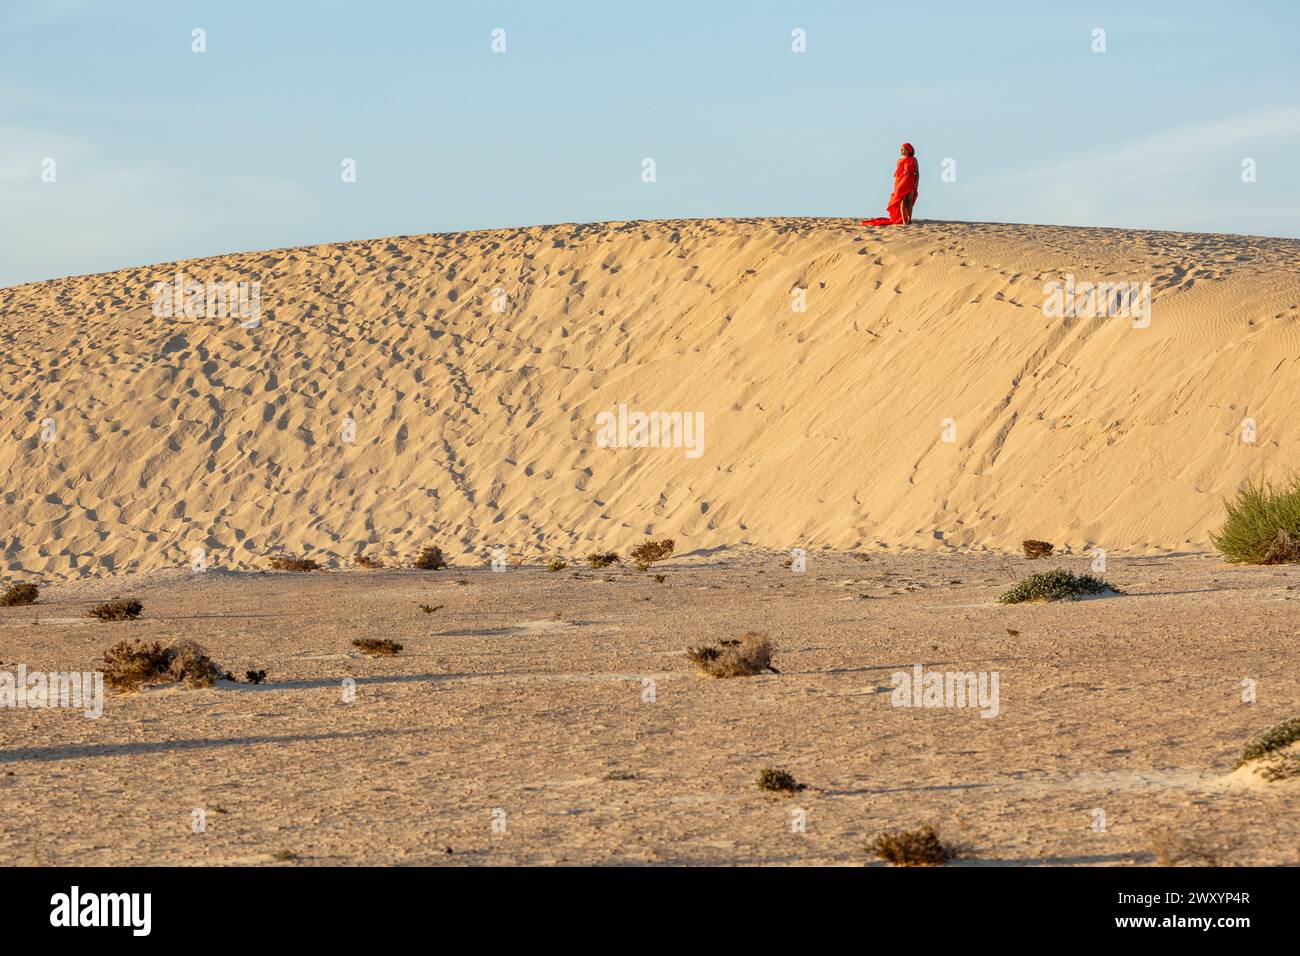 A lone woman dressed in a striking red dress stands atop a desert dune, her figure a bold contrast against the muted tones of the sandy landscape. She Stock Photo